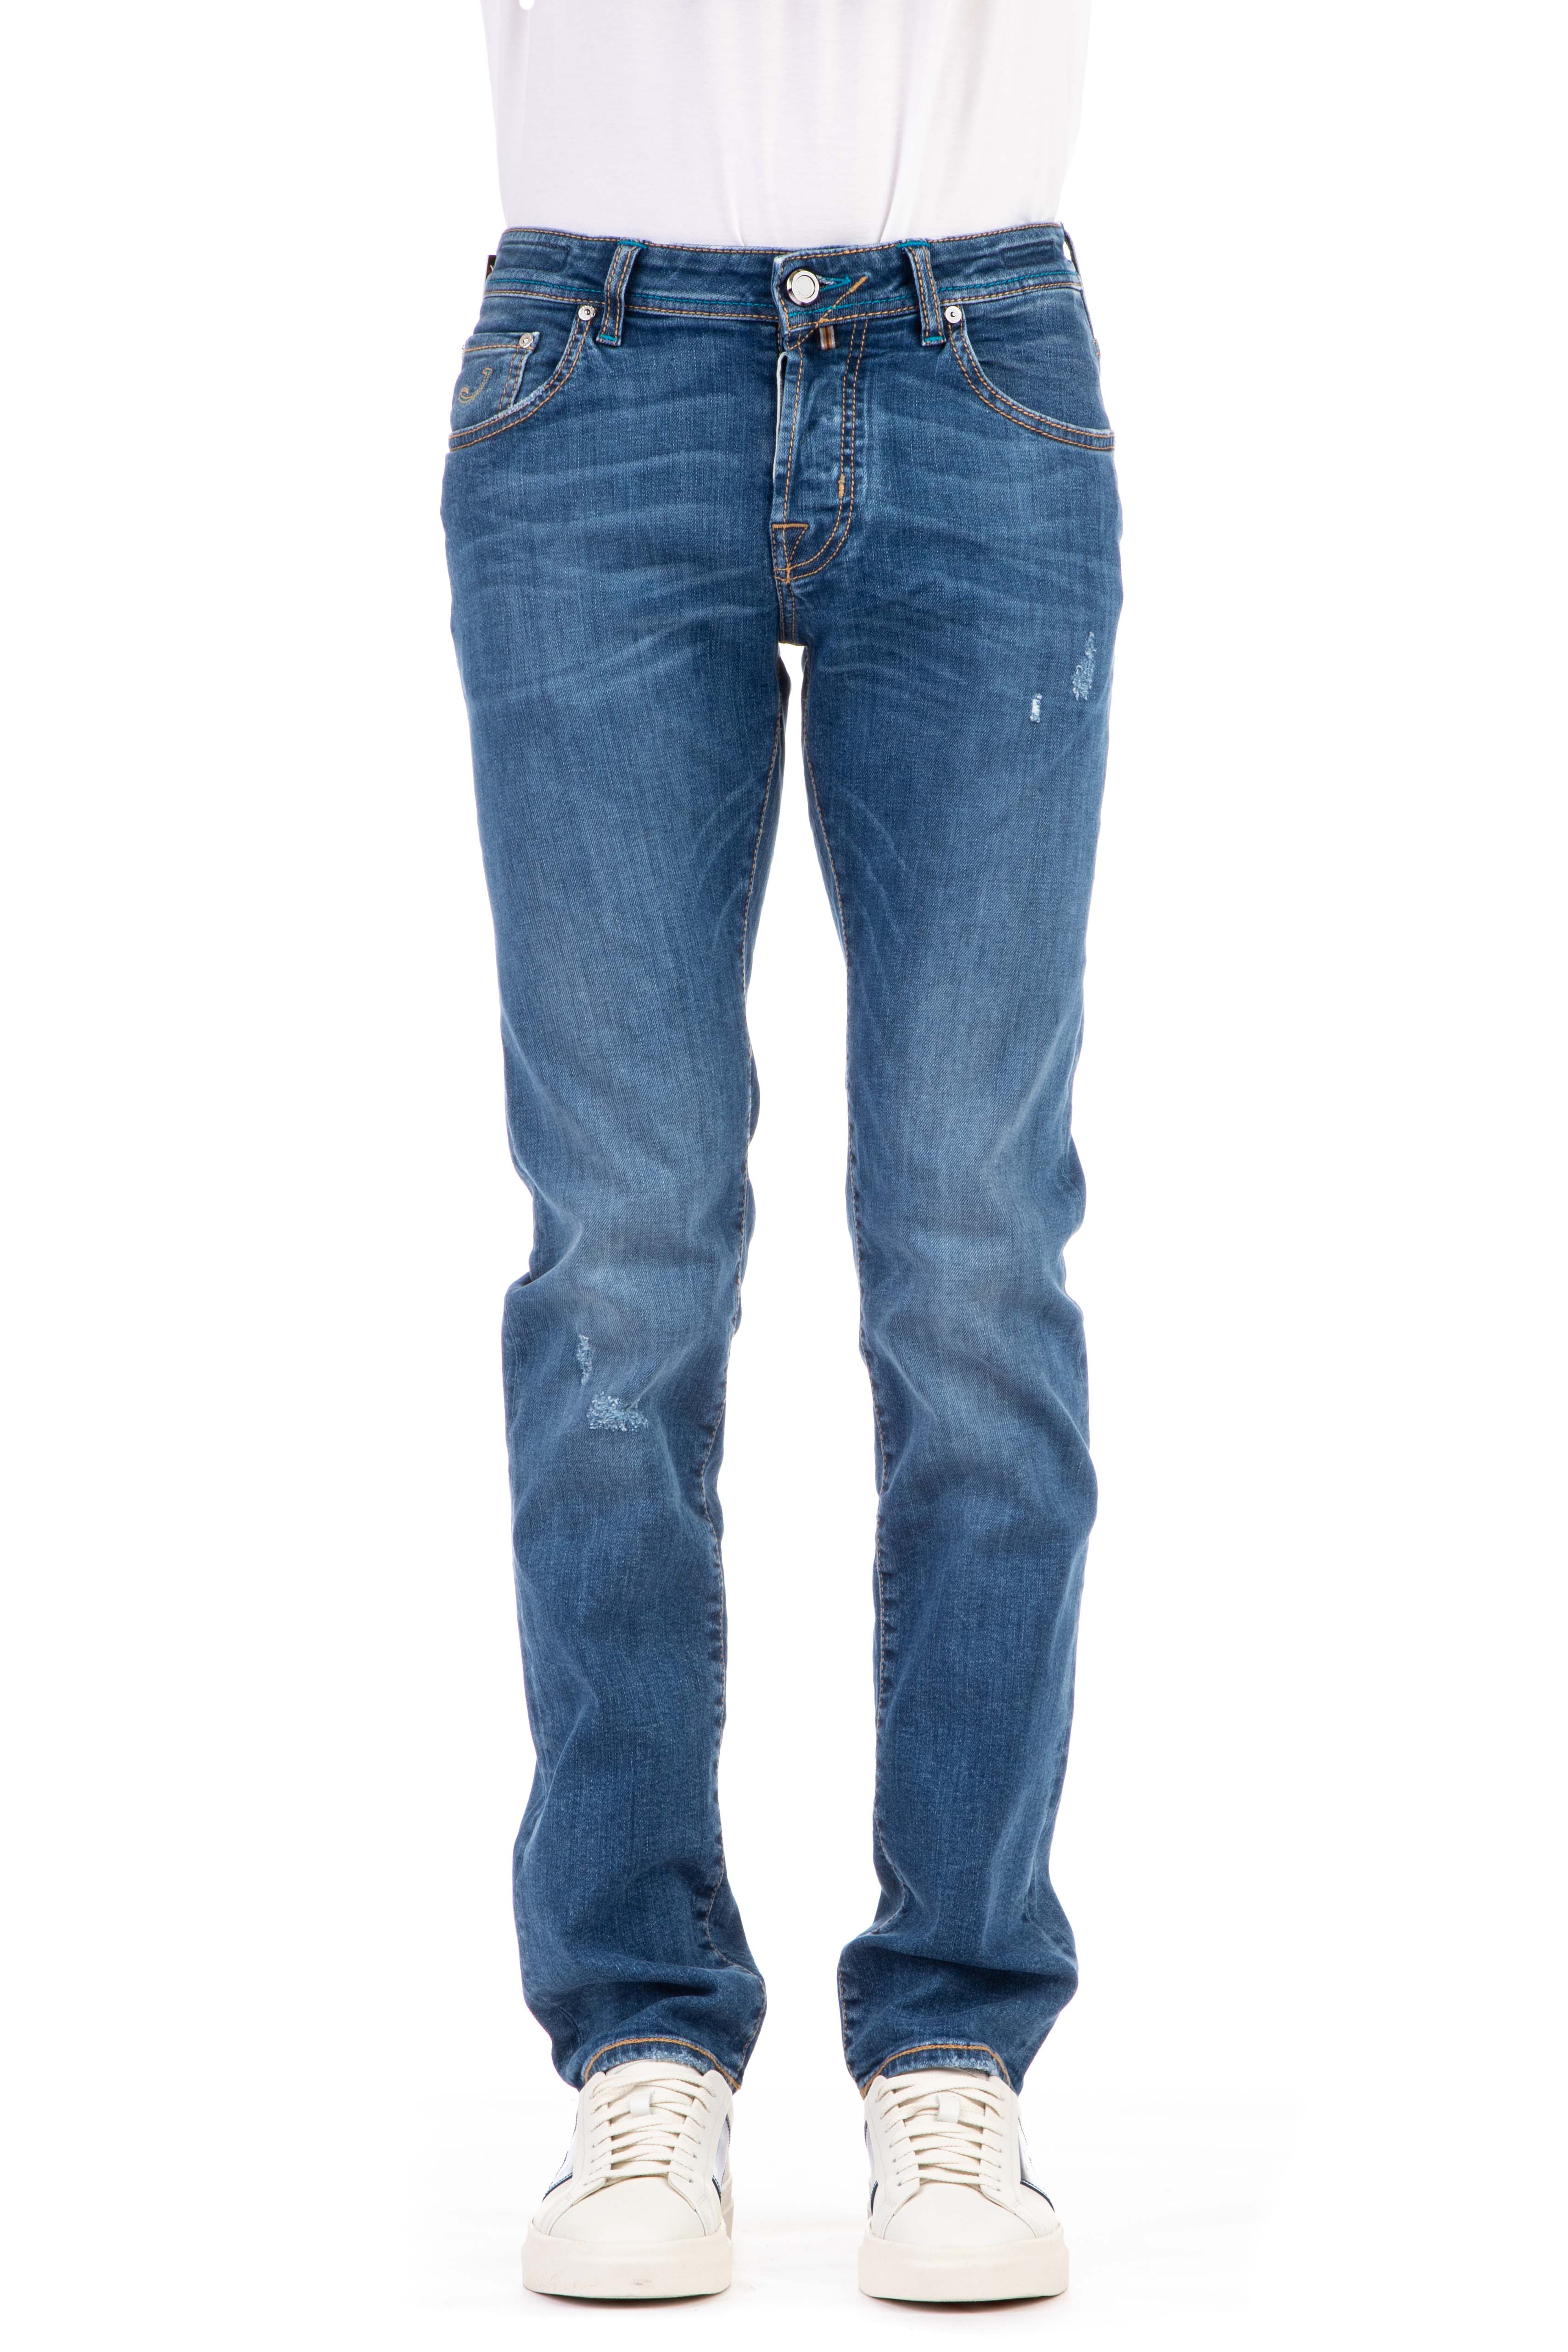 Limited edition jeans with blue label and nick fit